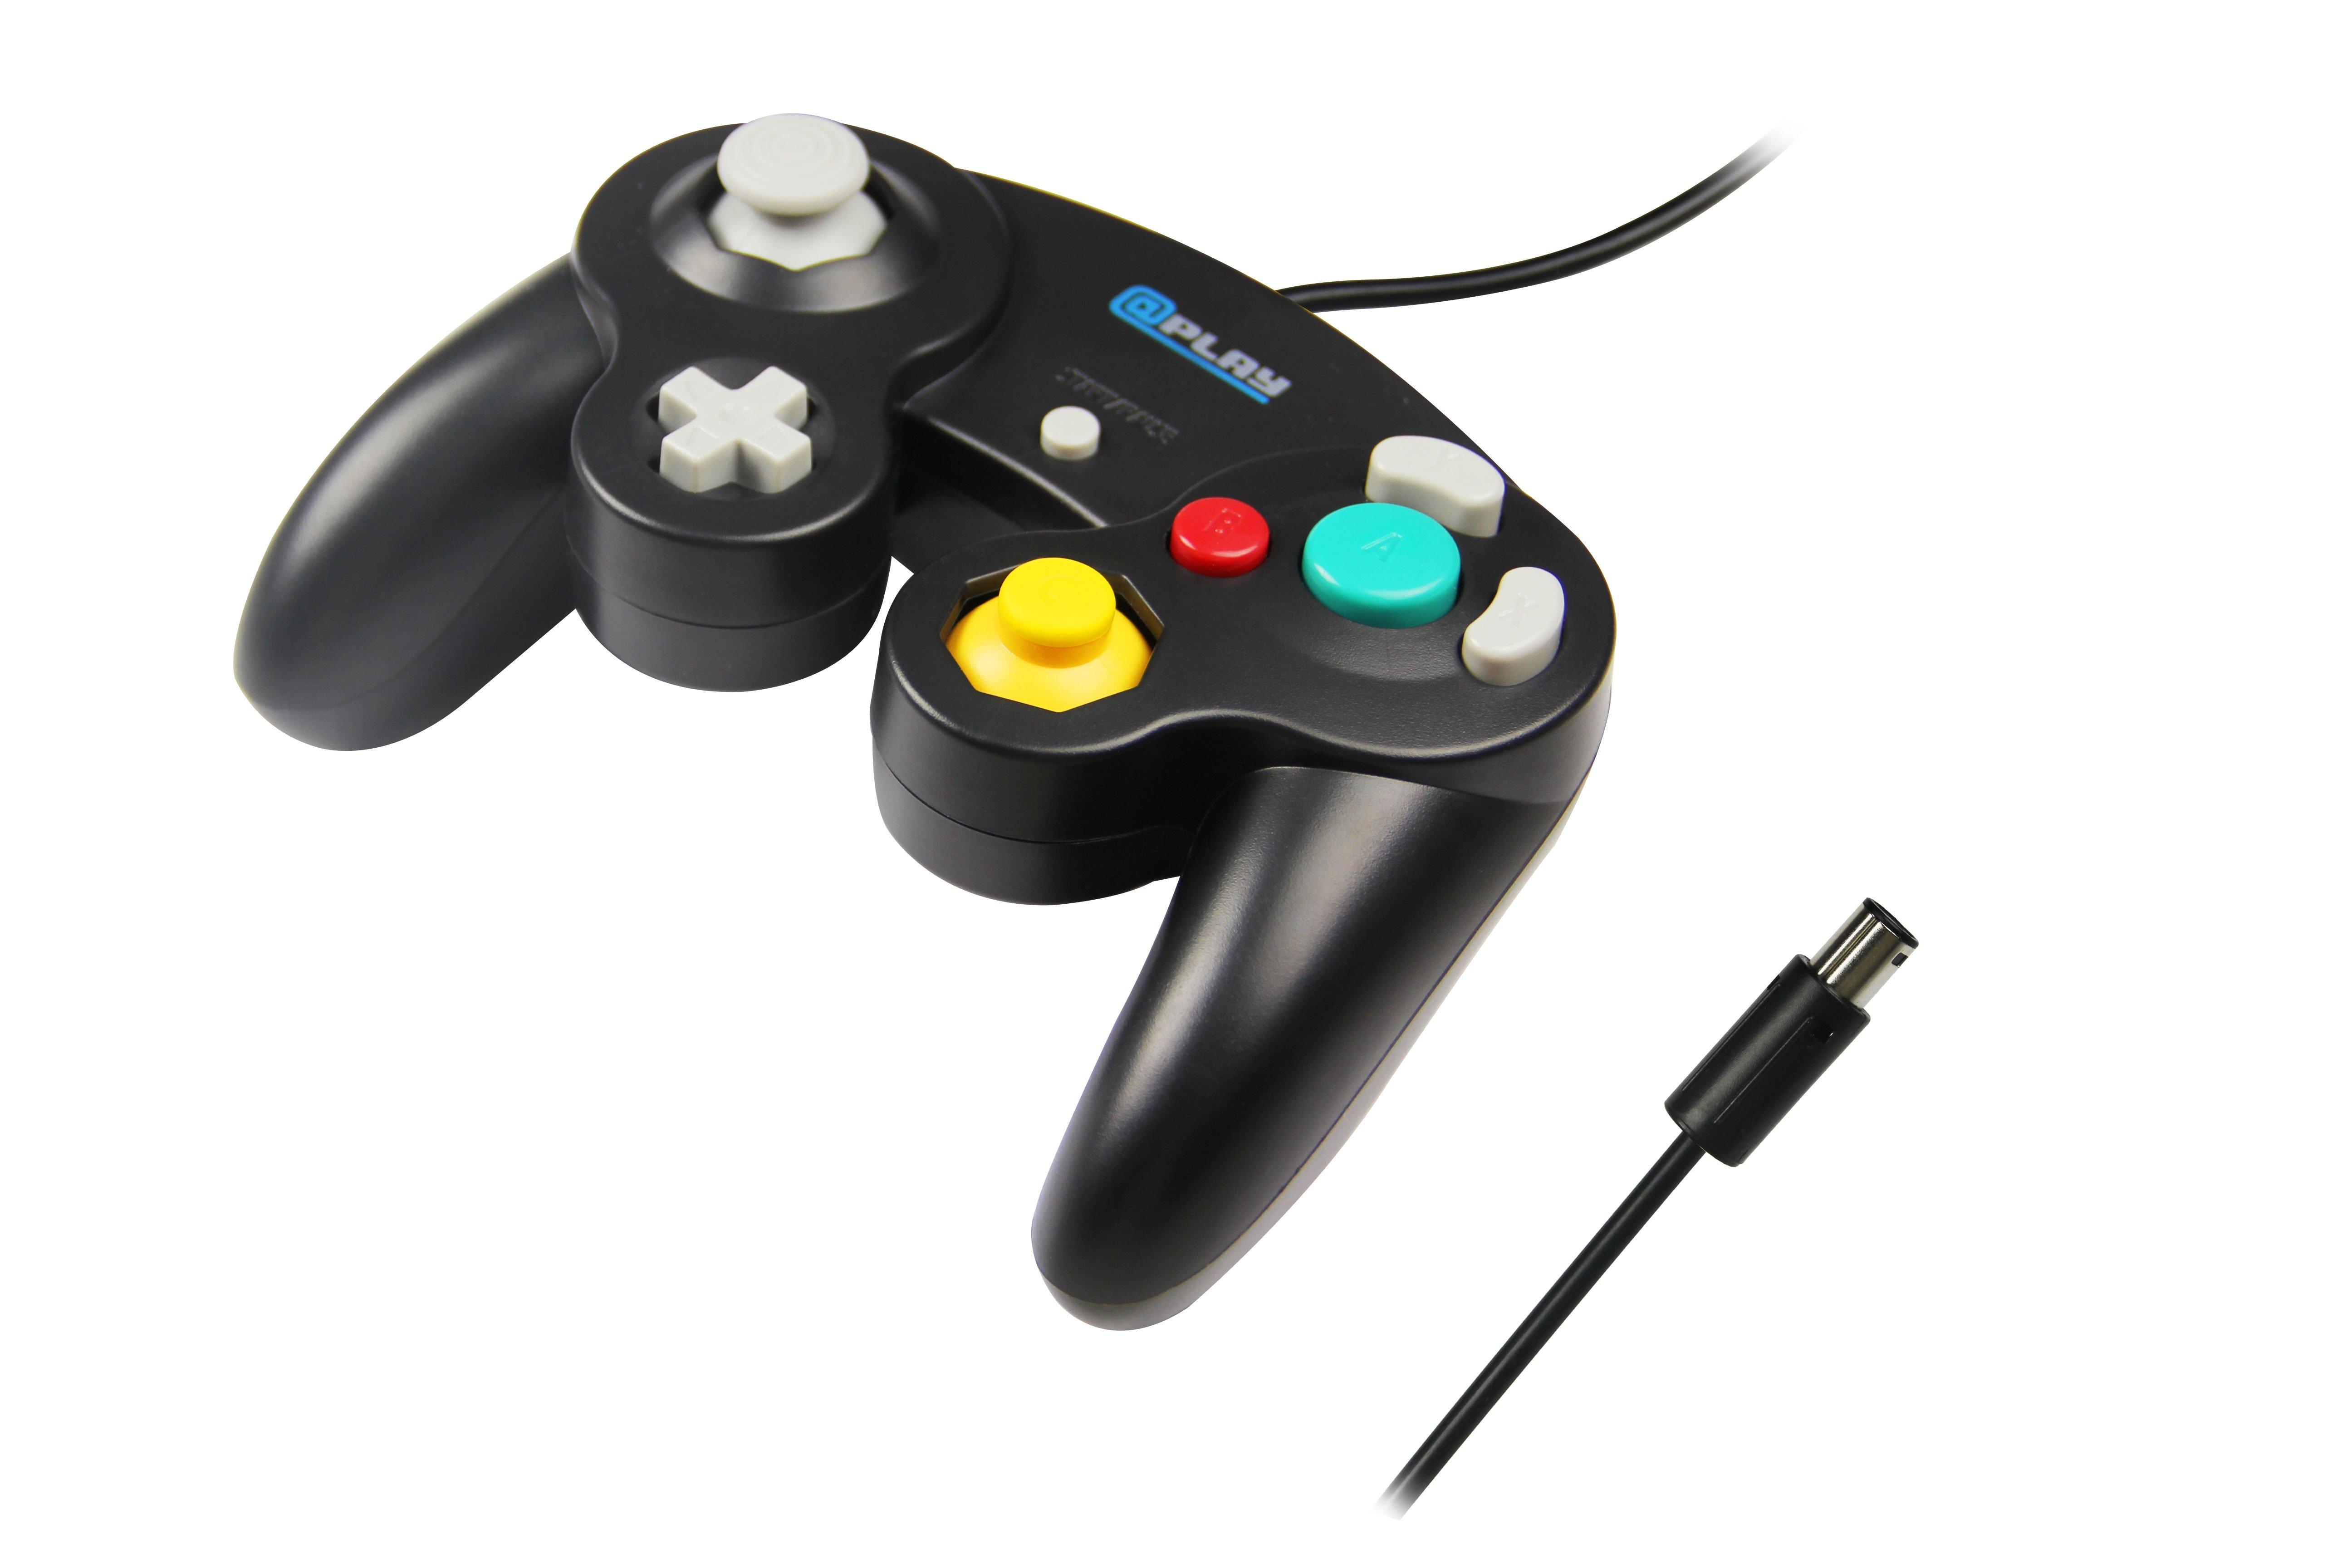 Will this controller work for GameCube games on nintendont? I use